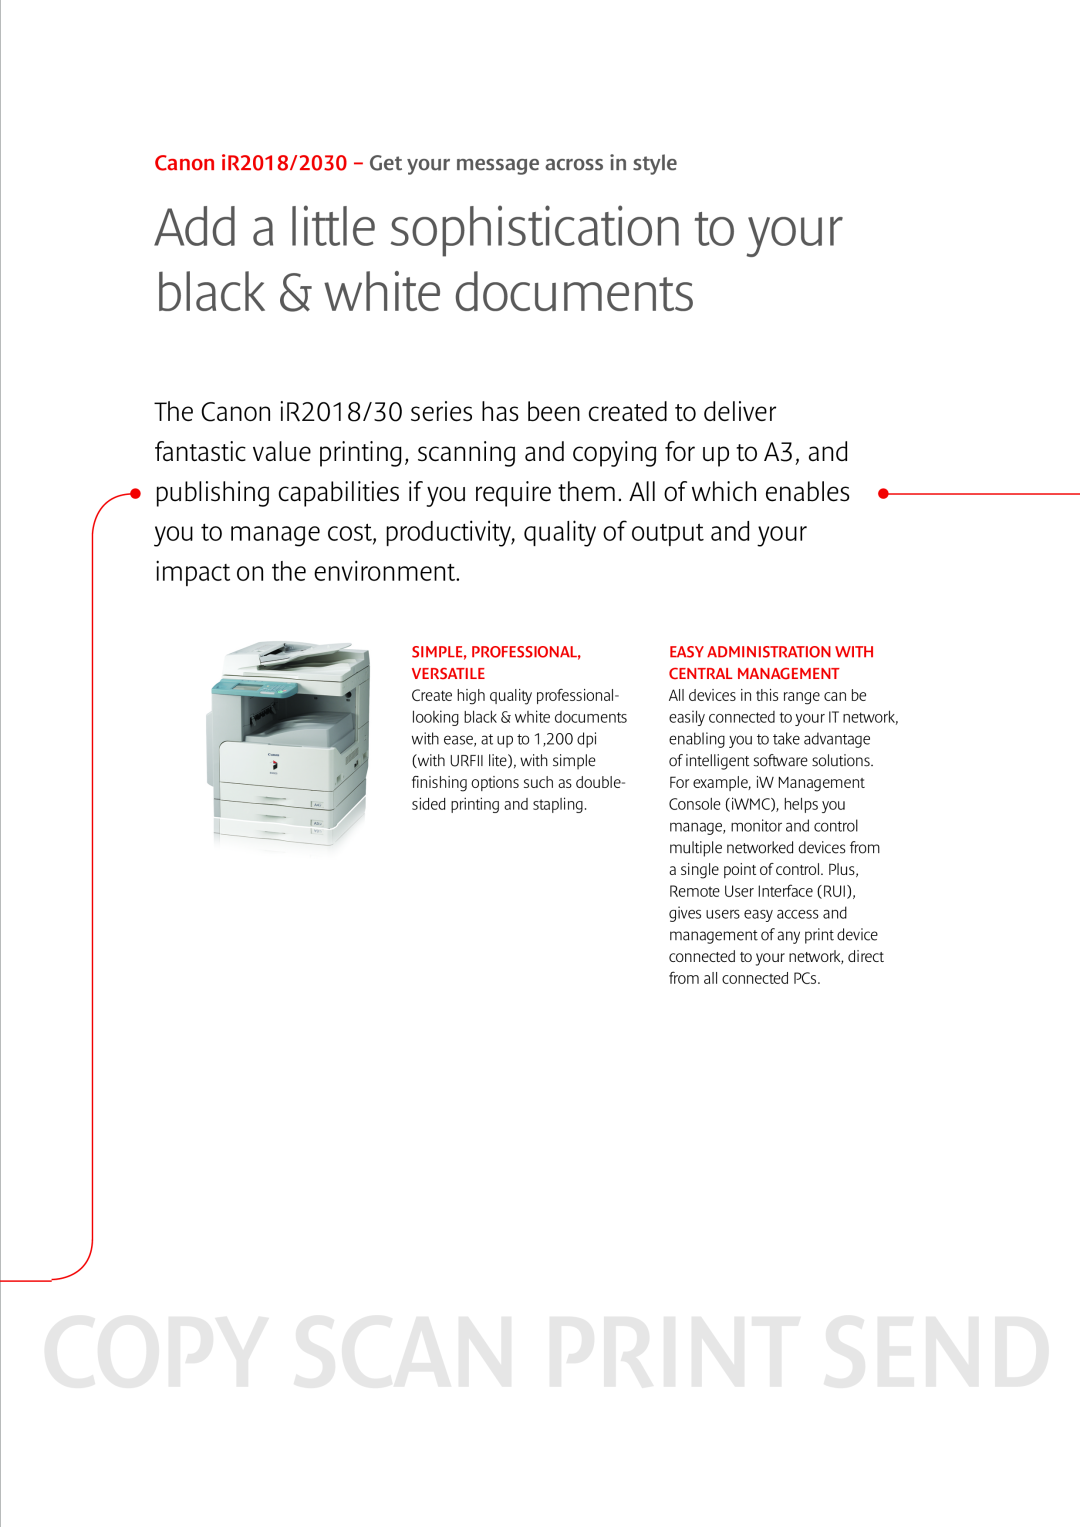 Canon manual Canon iR2018/2030 - Get your message across in style, Copy Scan Print Send, Simple, Professional, Versatile 